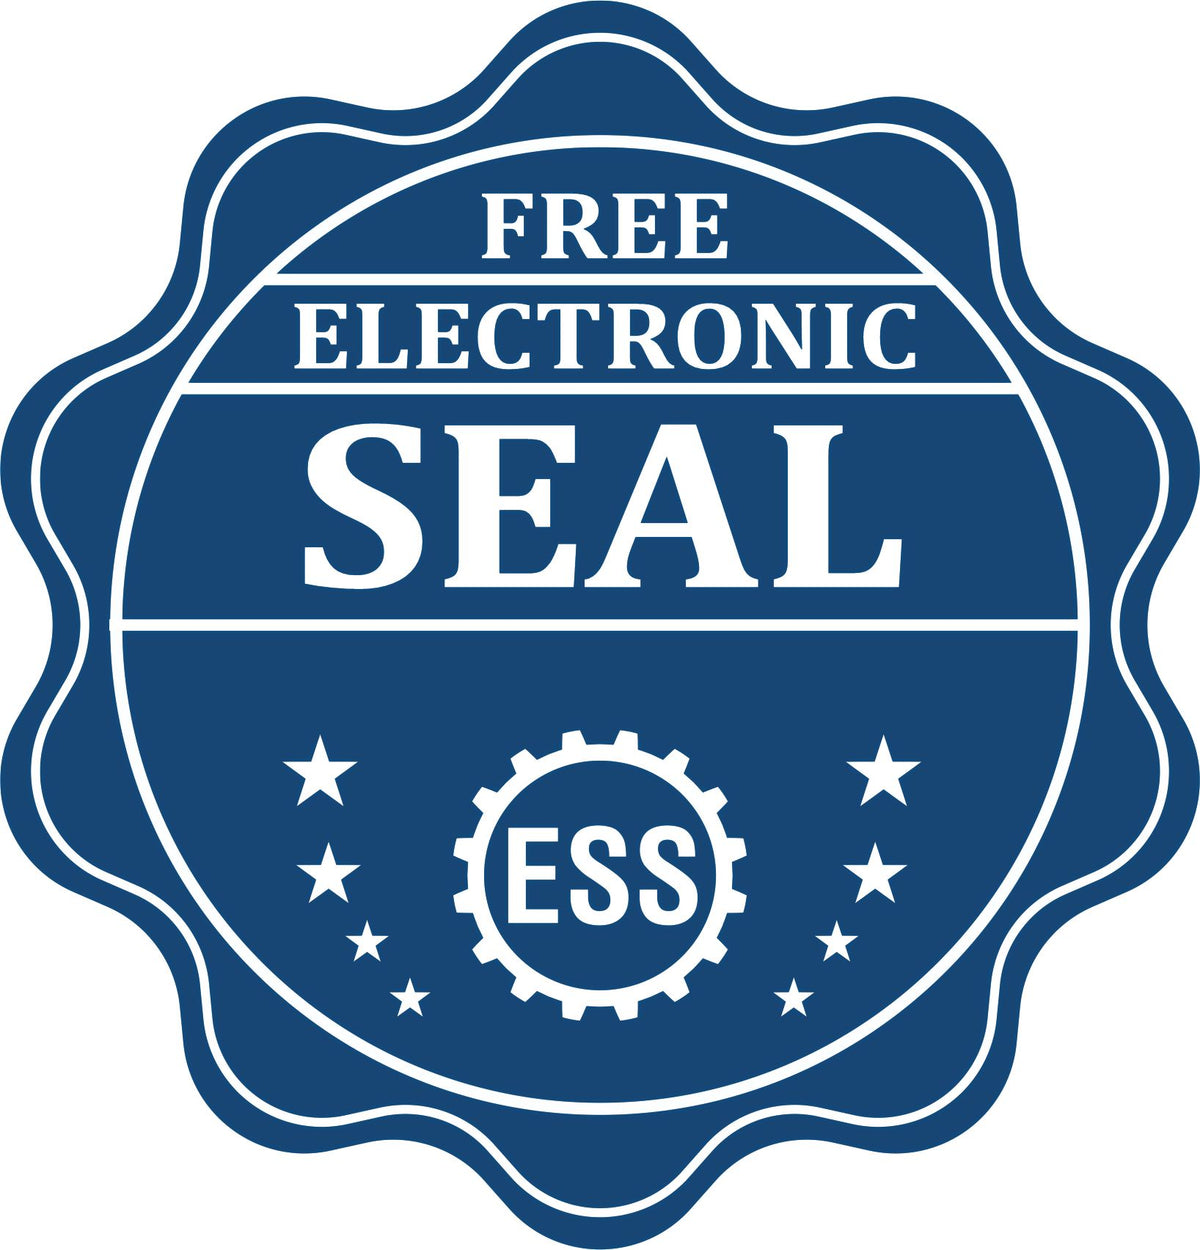 A badge showing a free electronic seal for the Slim Pre-Inked Michigan Land Surveyor Seal Stamp with stars and the ESS gear on the emblem.